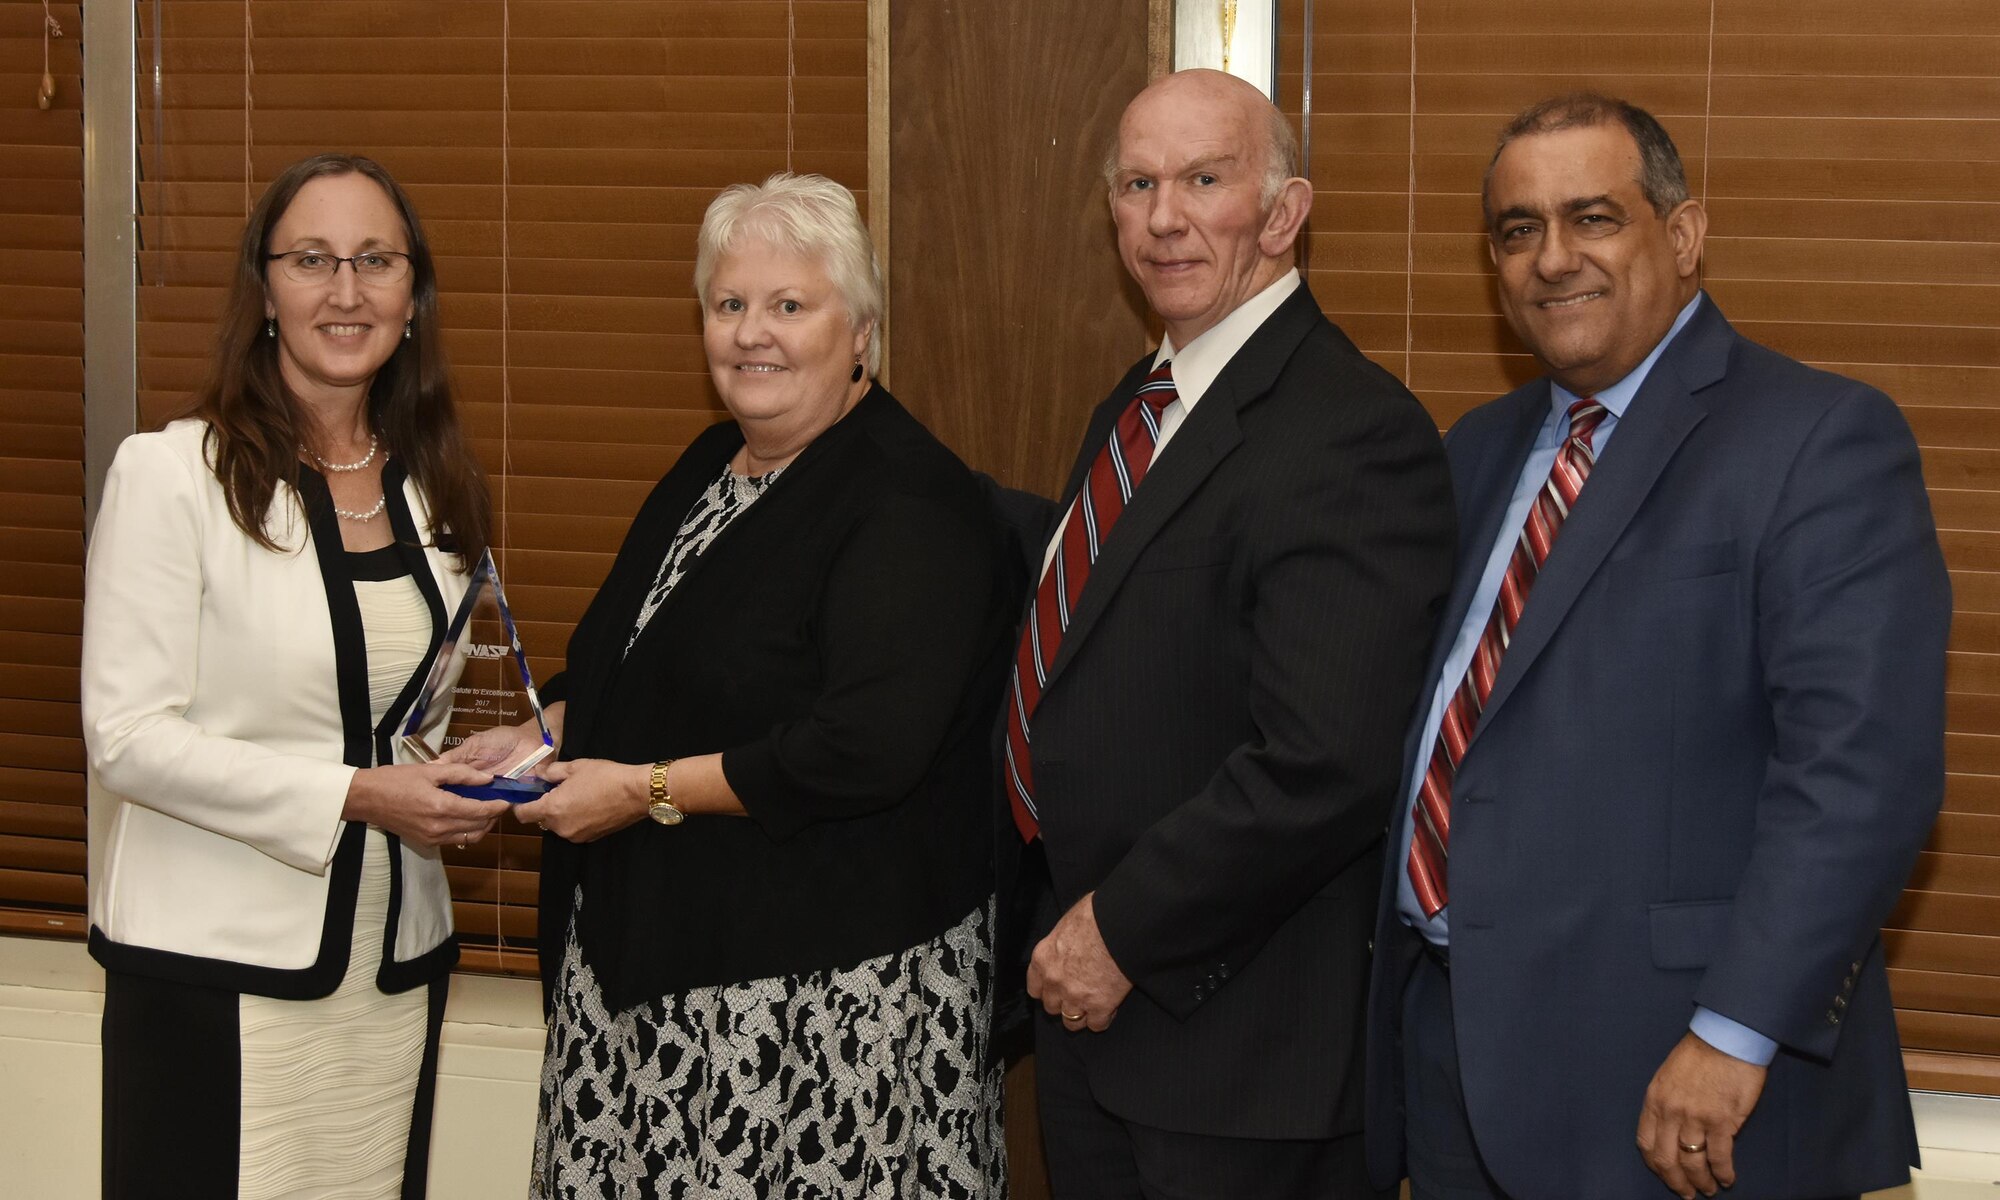 Judy Brewer (second from left), NAS administrative assistant, receives the Customer Service Award from NAS General Manager Cynthia Rivera during the National Aerospace Solutions 2017 Salute to Excellence Annual Awards Banquet held Nov. 16 at the Arnold Lakeside Center, Arnold Air Force Base, Tenn.. NAS Deputy General Manager Doug Pearson and NAS Business Services Manager Miguel Lugo are pictured at right. (U.S. Air Force photo/Rick Goodfriend)